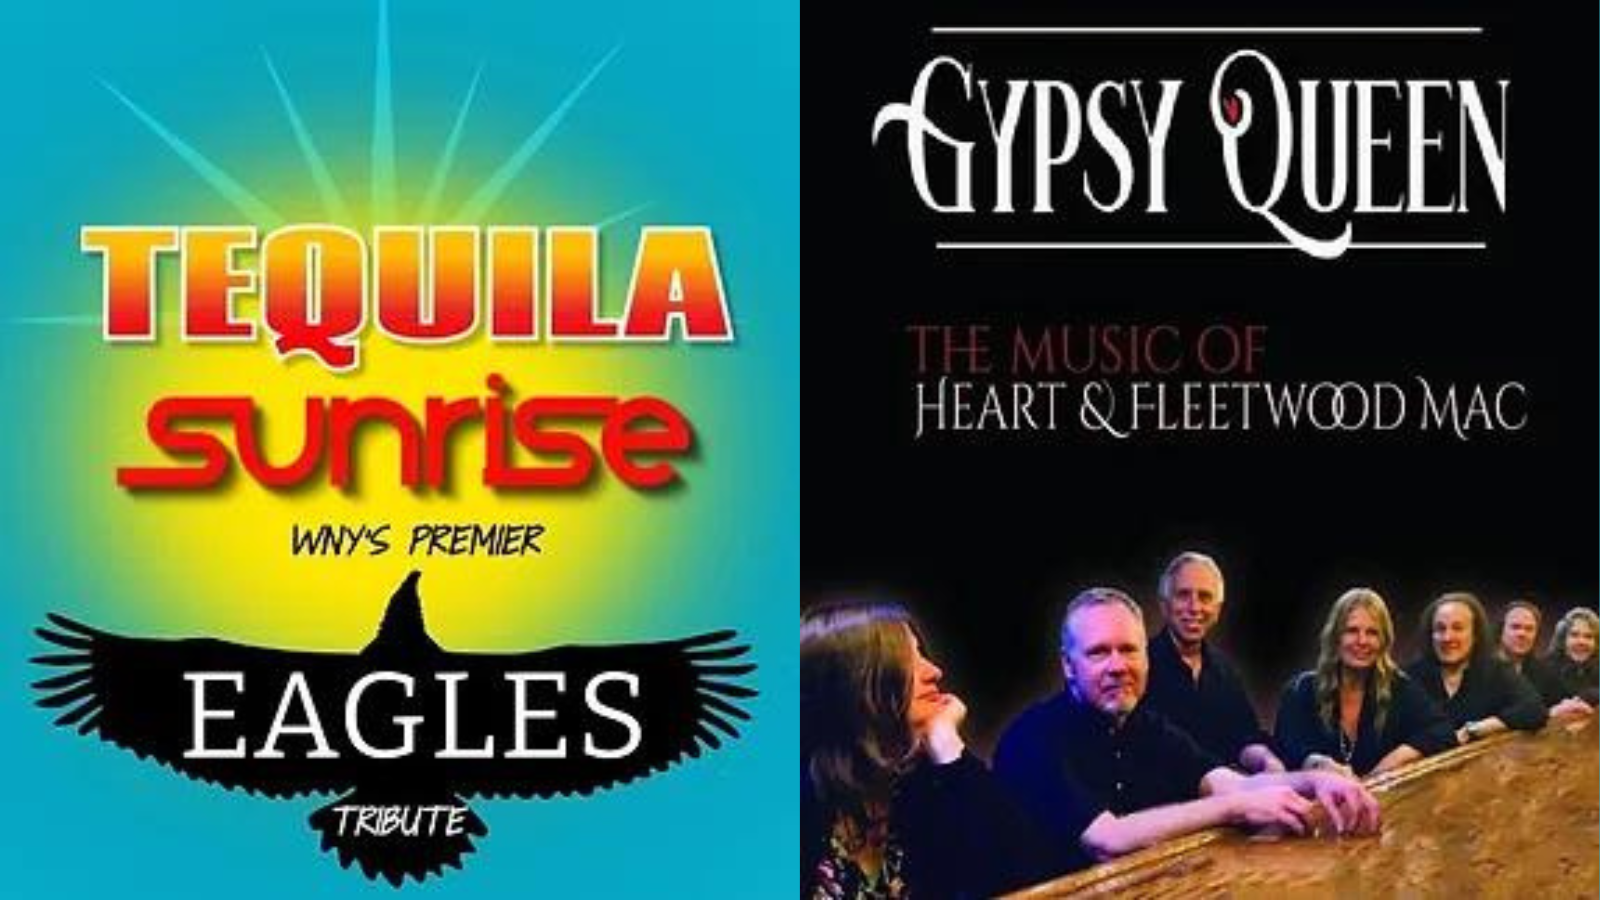 Gateway Harbor Concert Series Tequila Sunrise and Gypsy Queen All WNY